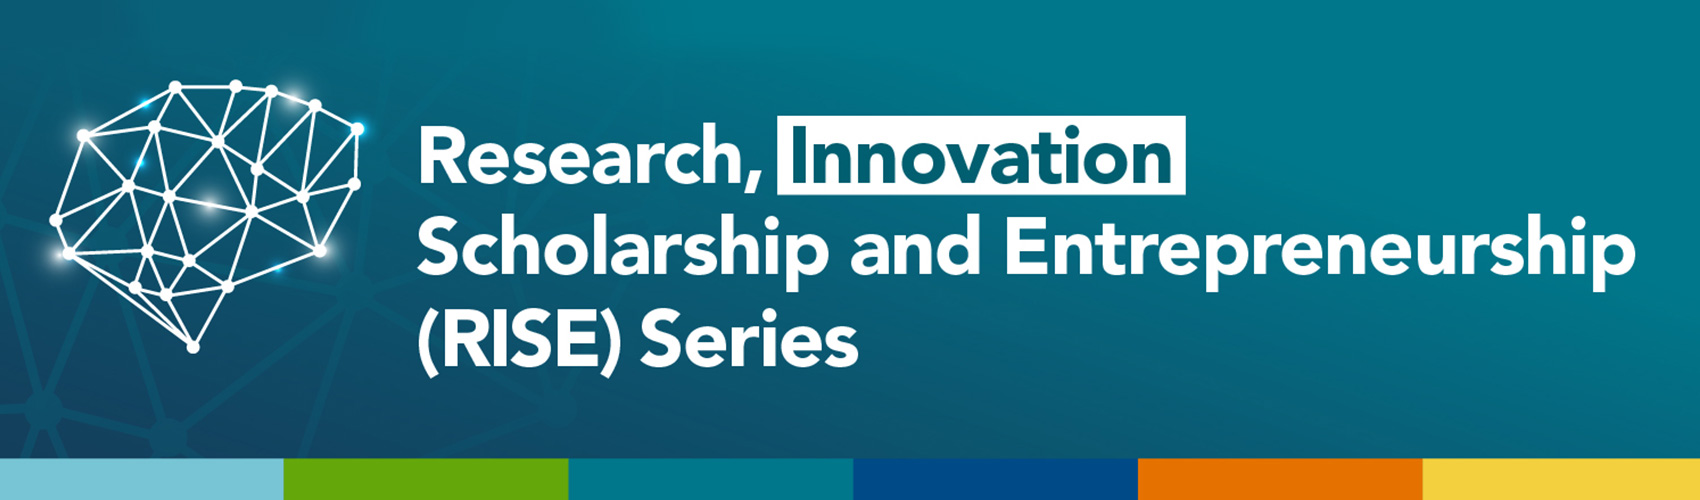 Research, Innovation, Scholarship and Entrepreneurship (RISE) Series